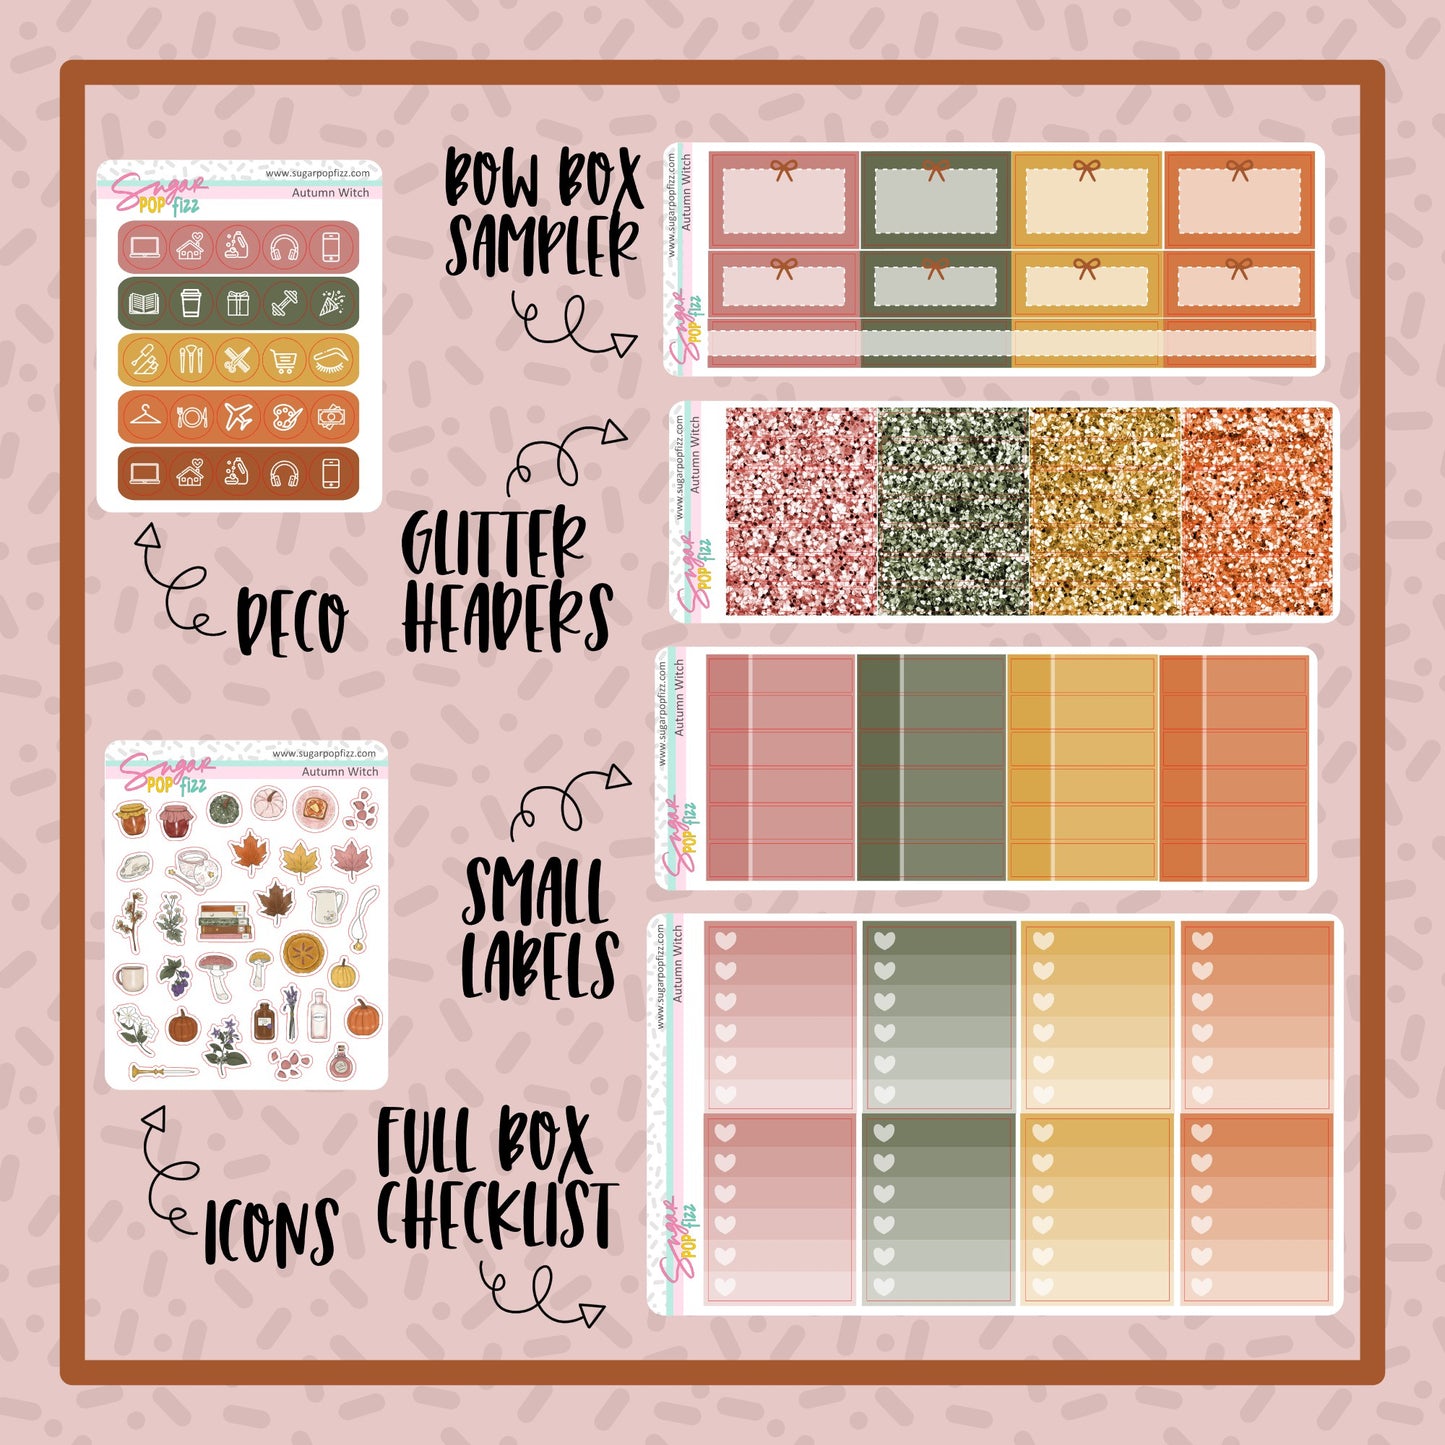 Autumn Witch Weekly Kit Add-ons